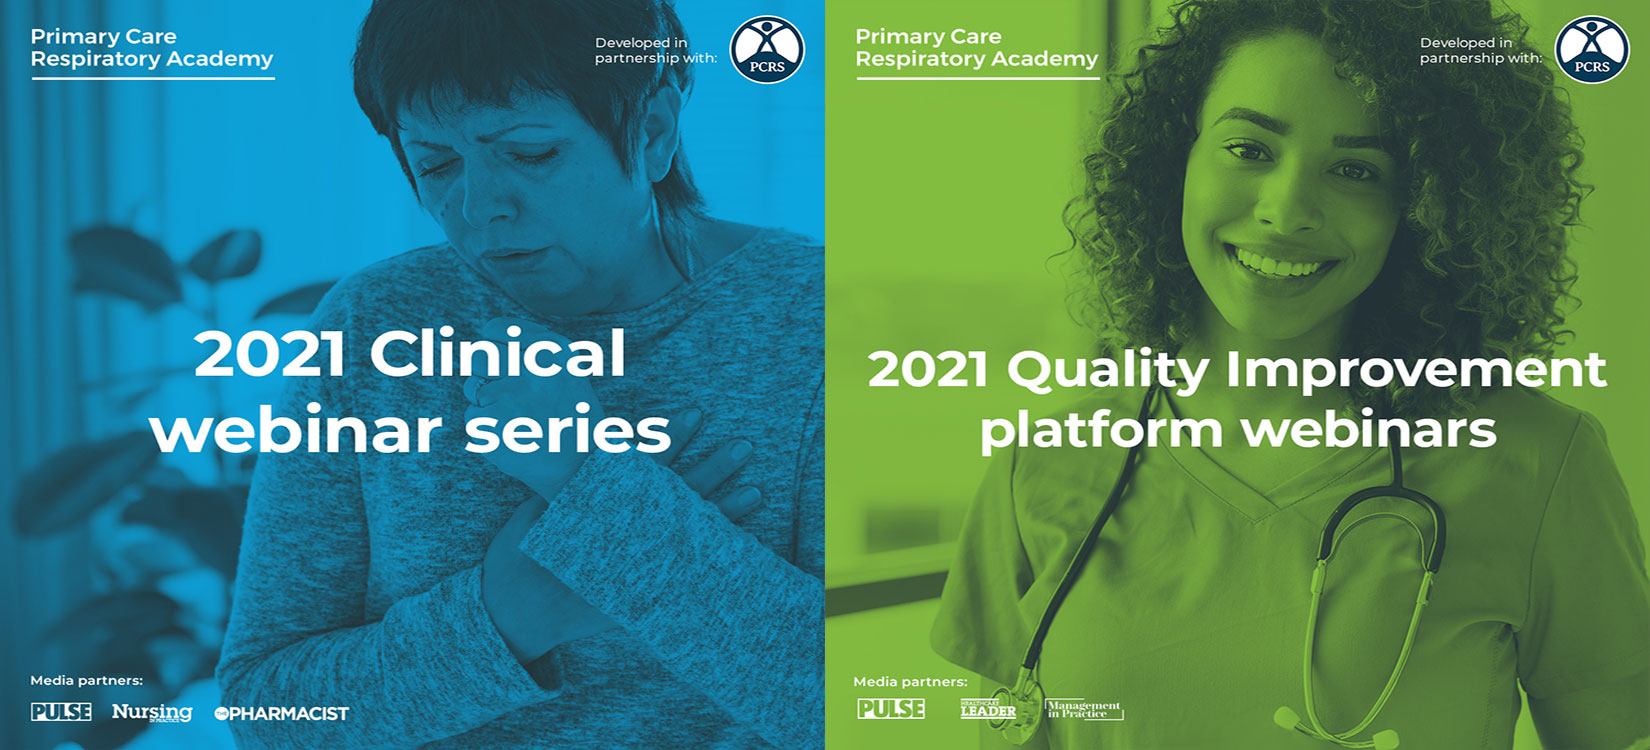 2021 PCRA Webinar series now available for on-demand viewing